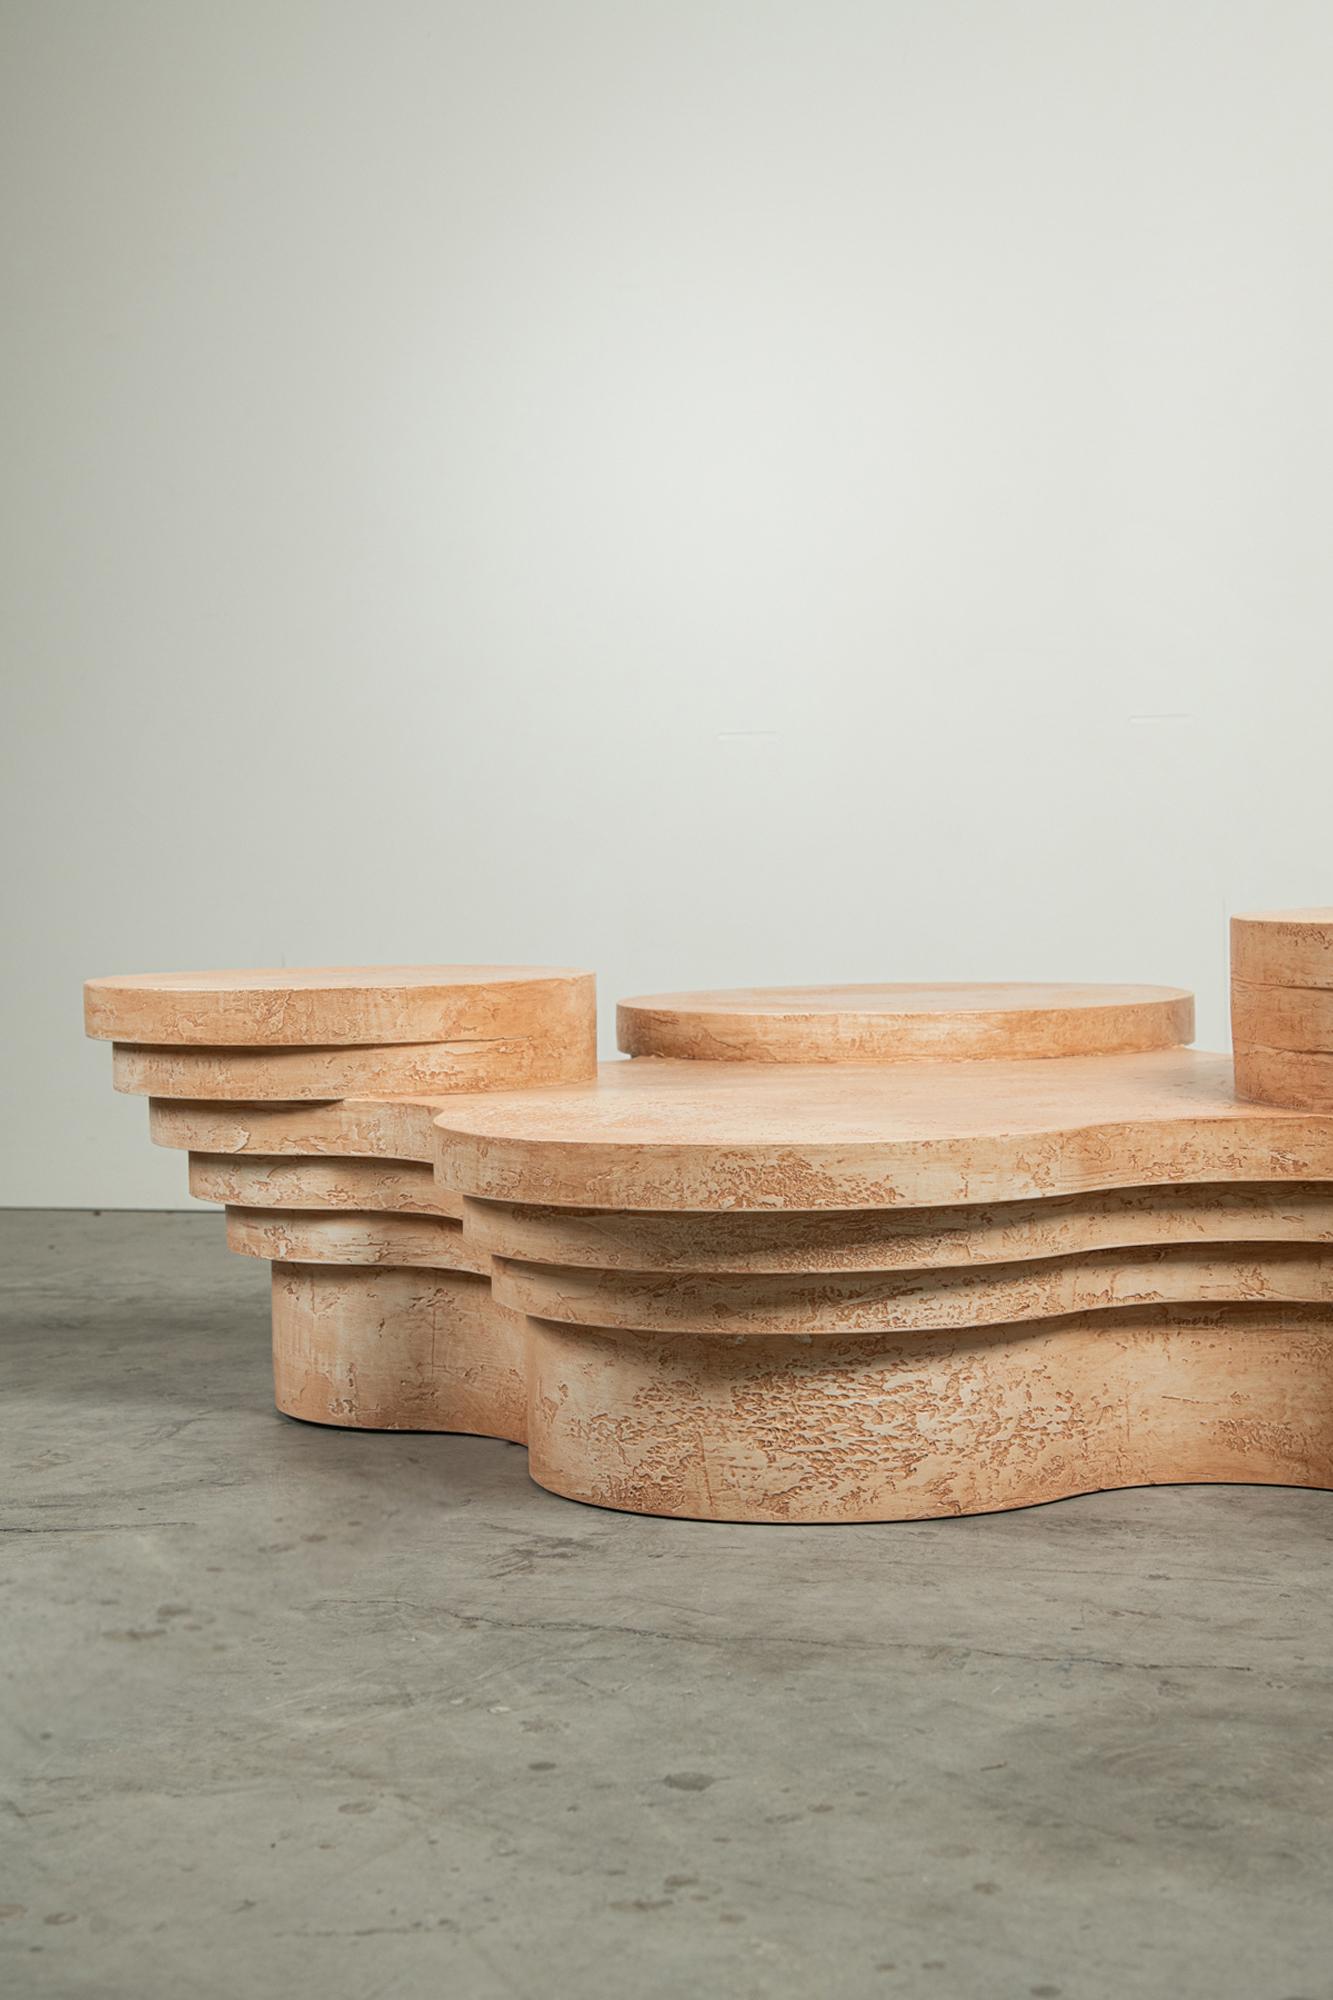 Italian Slice Me Up Sculptural Coffee Table by Pietro Franceschini